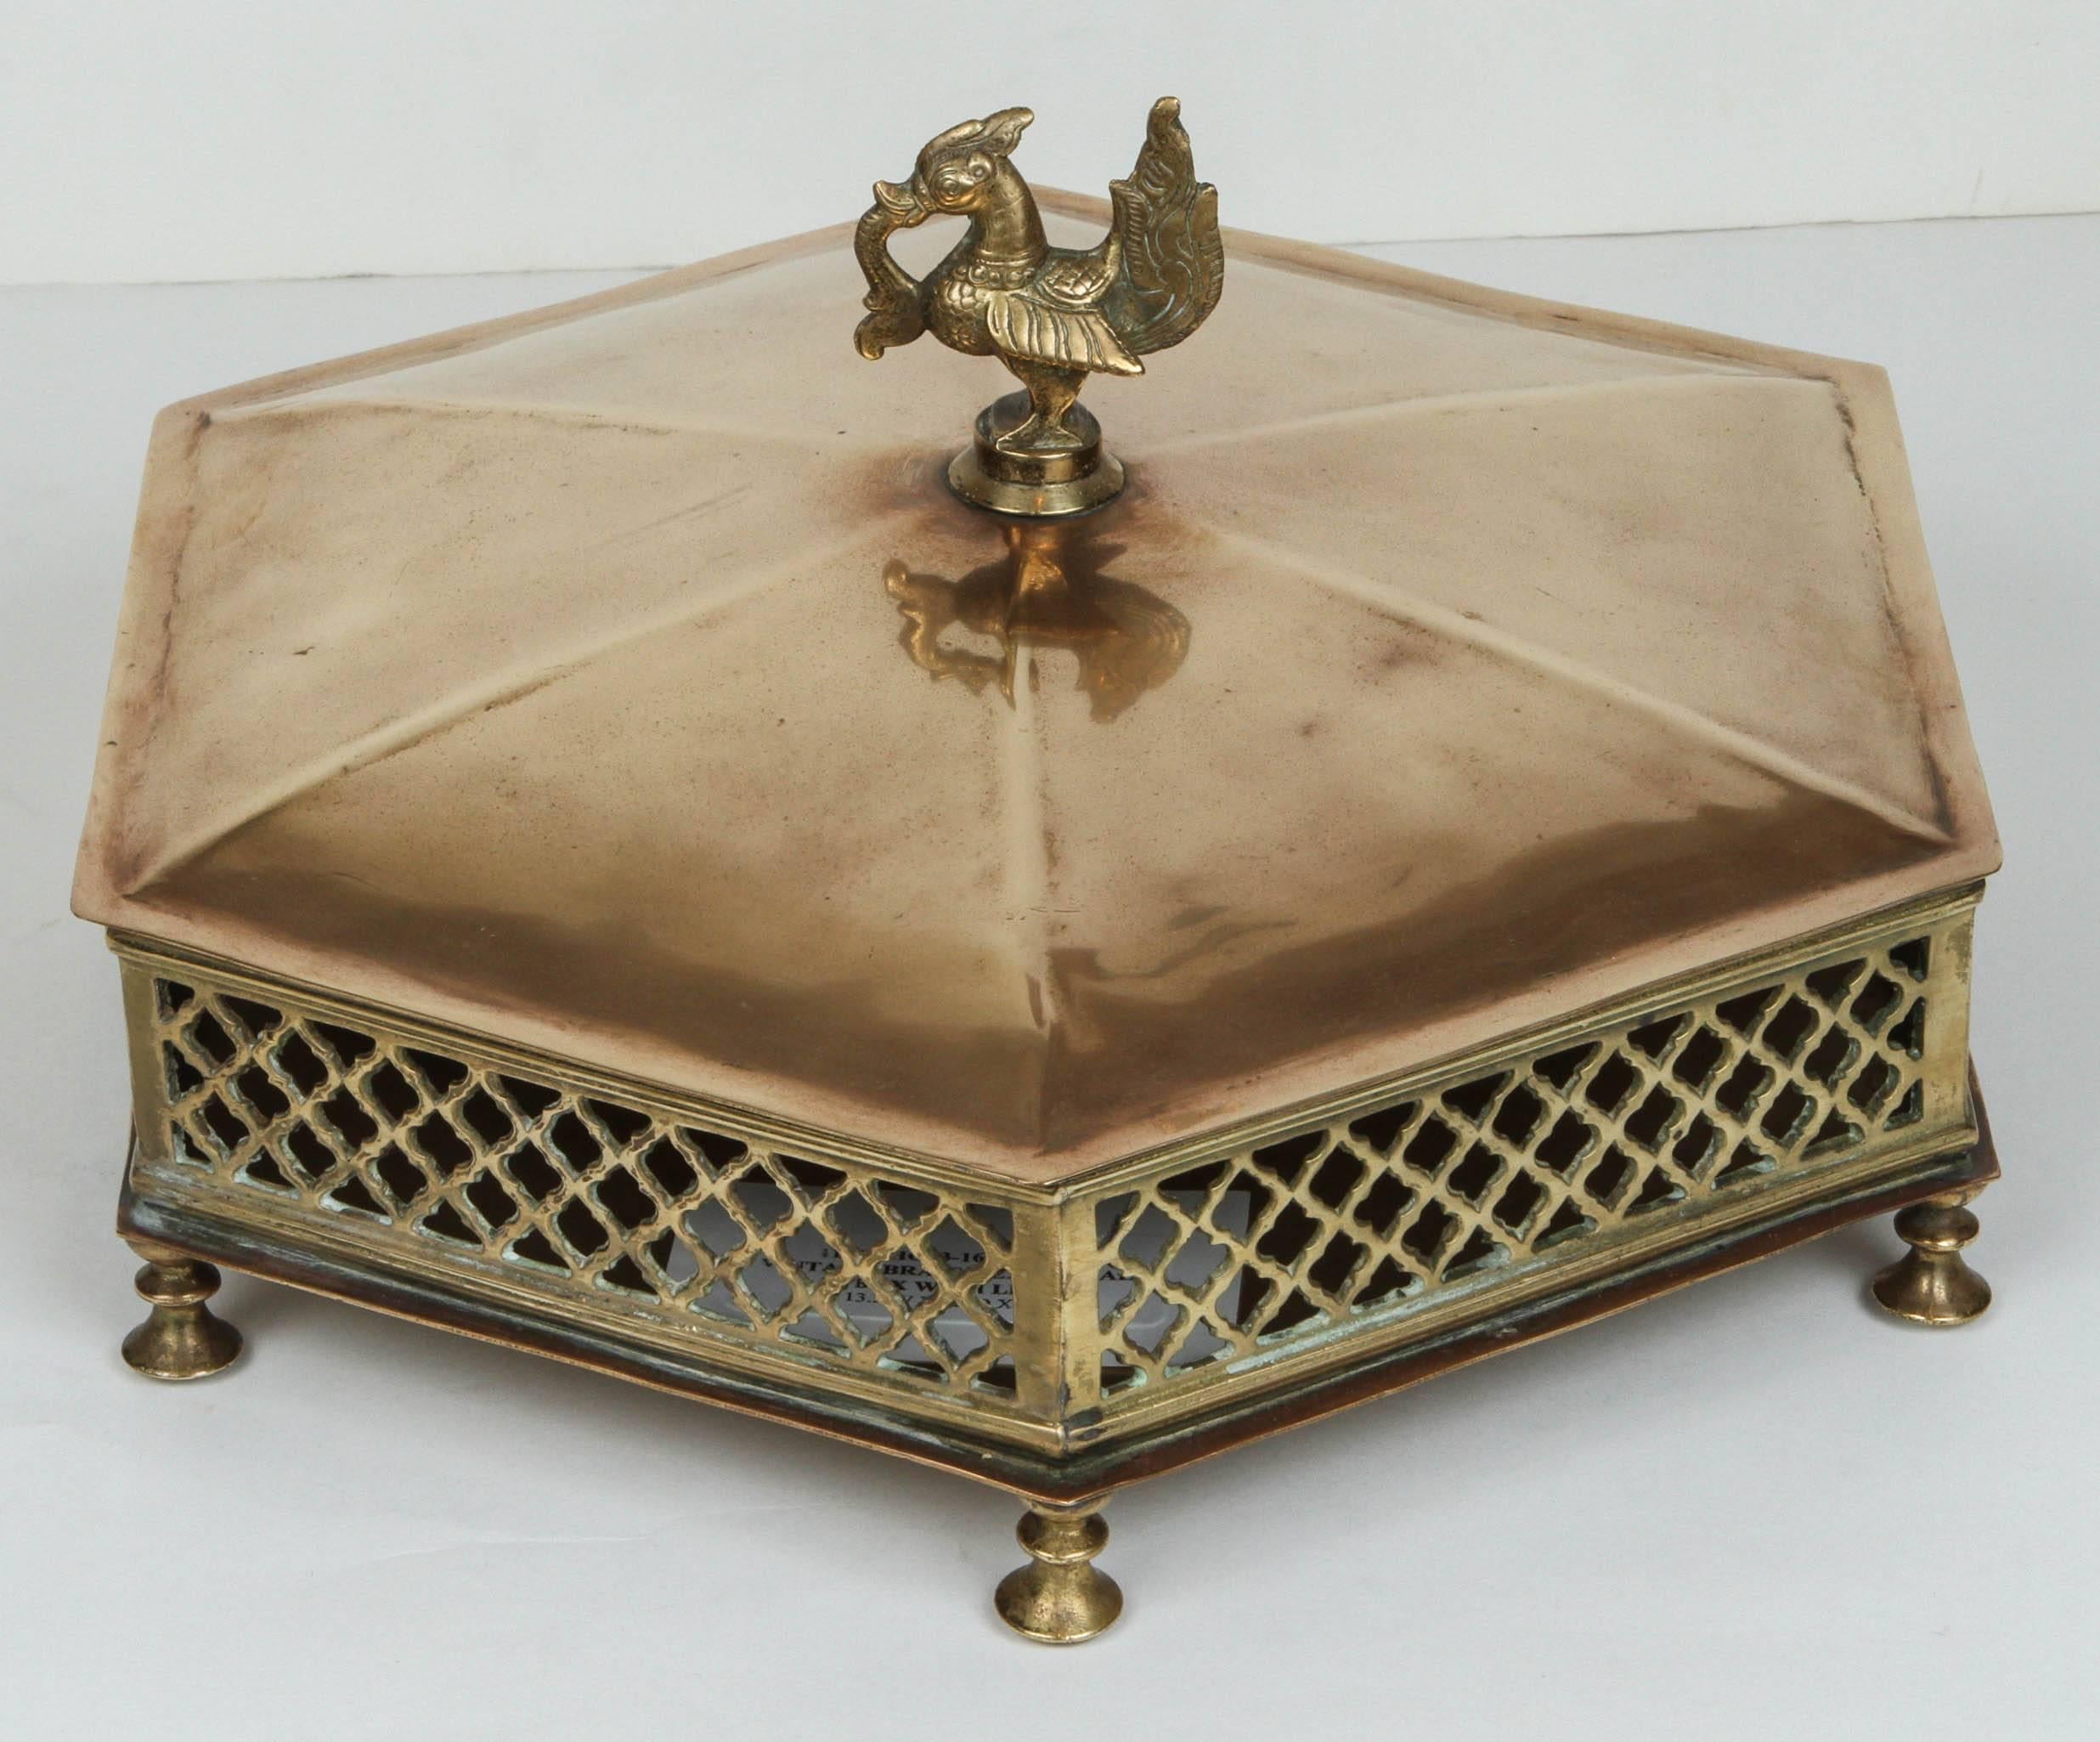 Beautifully proportioned eight six-sided brass box. Lattice sides, a domed lid, footed base and a bird finial all work together to make a stunning box that is beautiful and utilitarian.